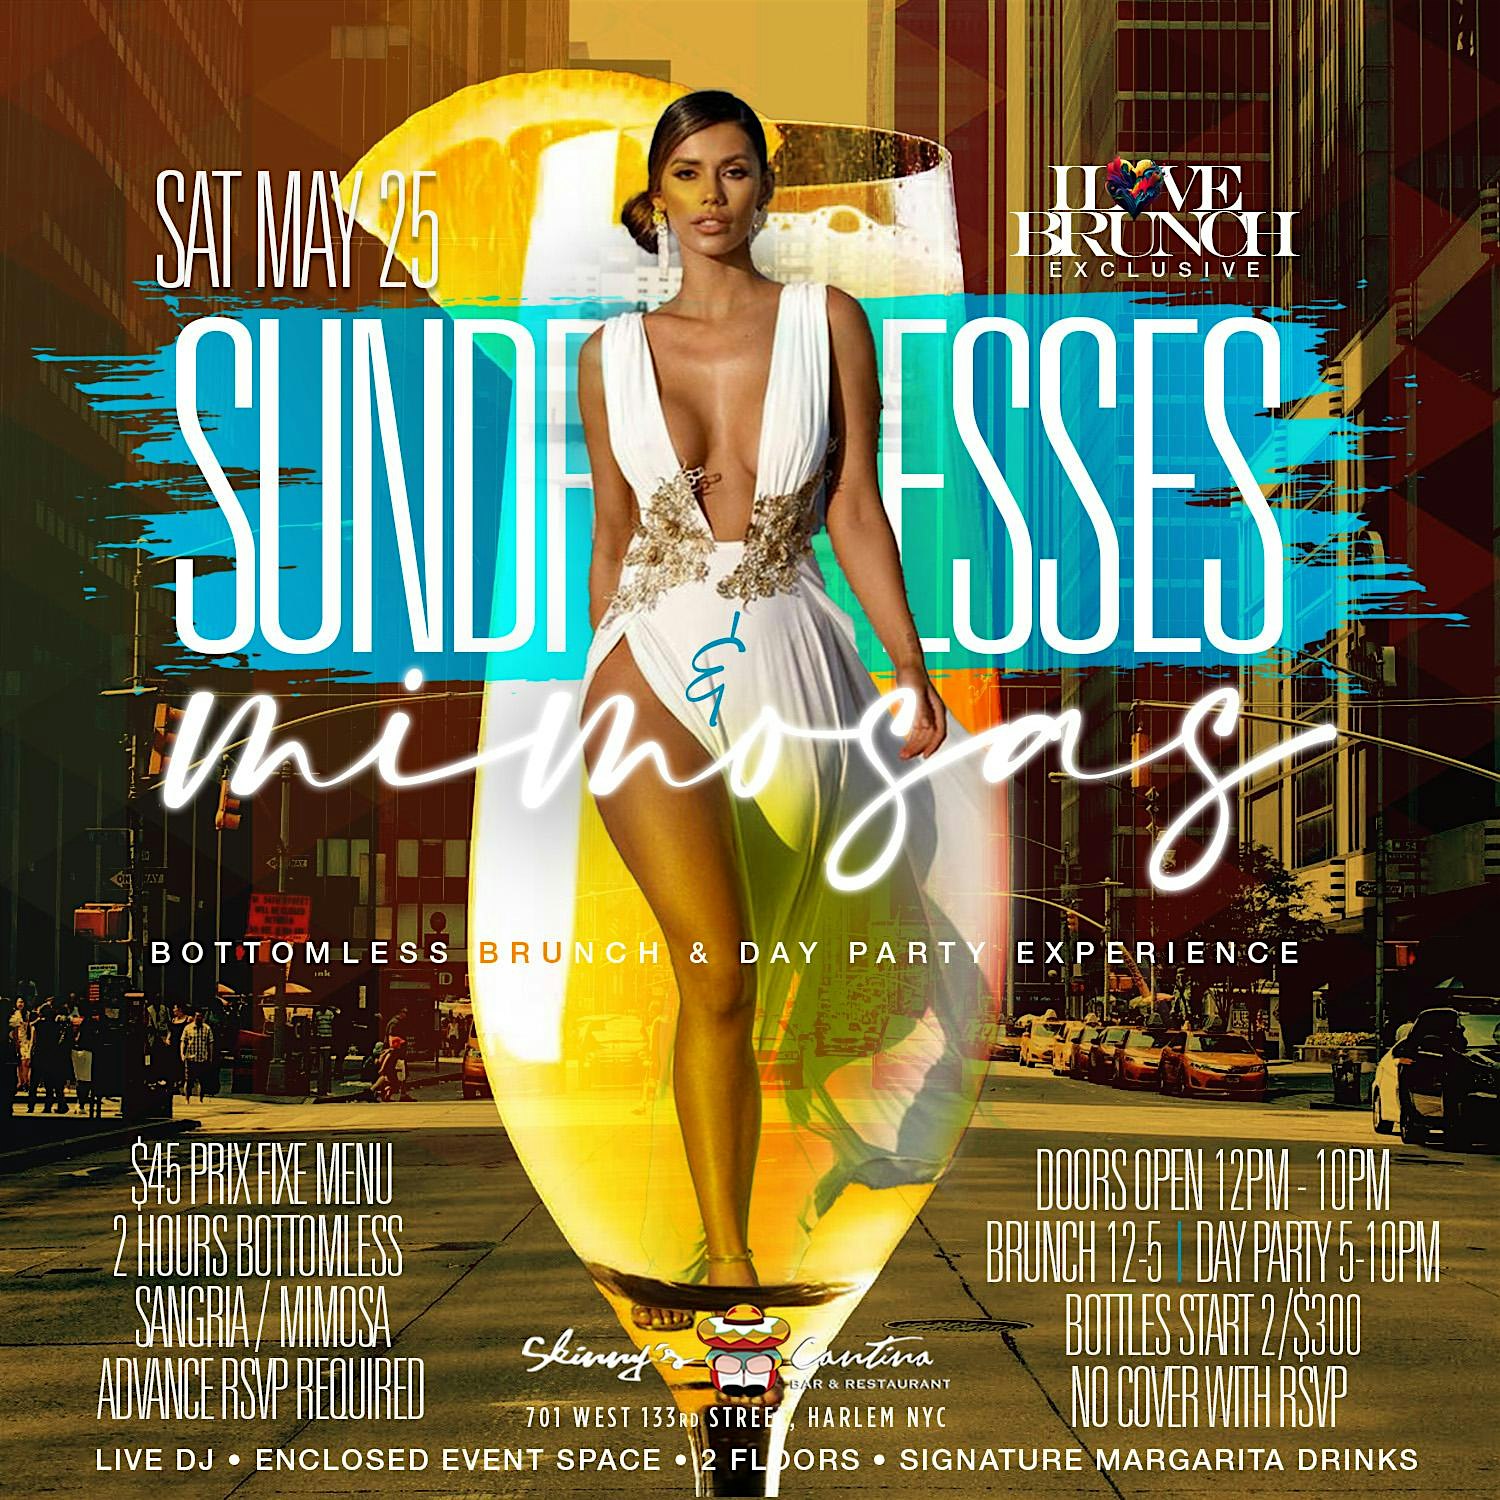 Sundress and Mimosas, Brunch x Day Party, Bdays EAT FREE, 2hrs bottomless